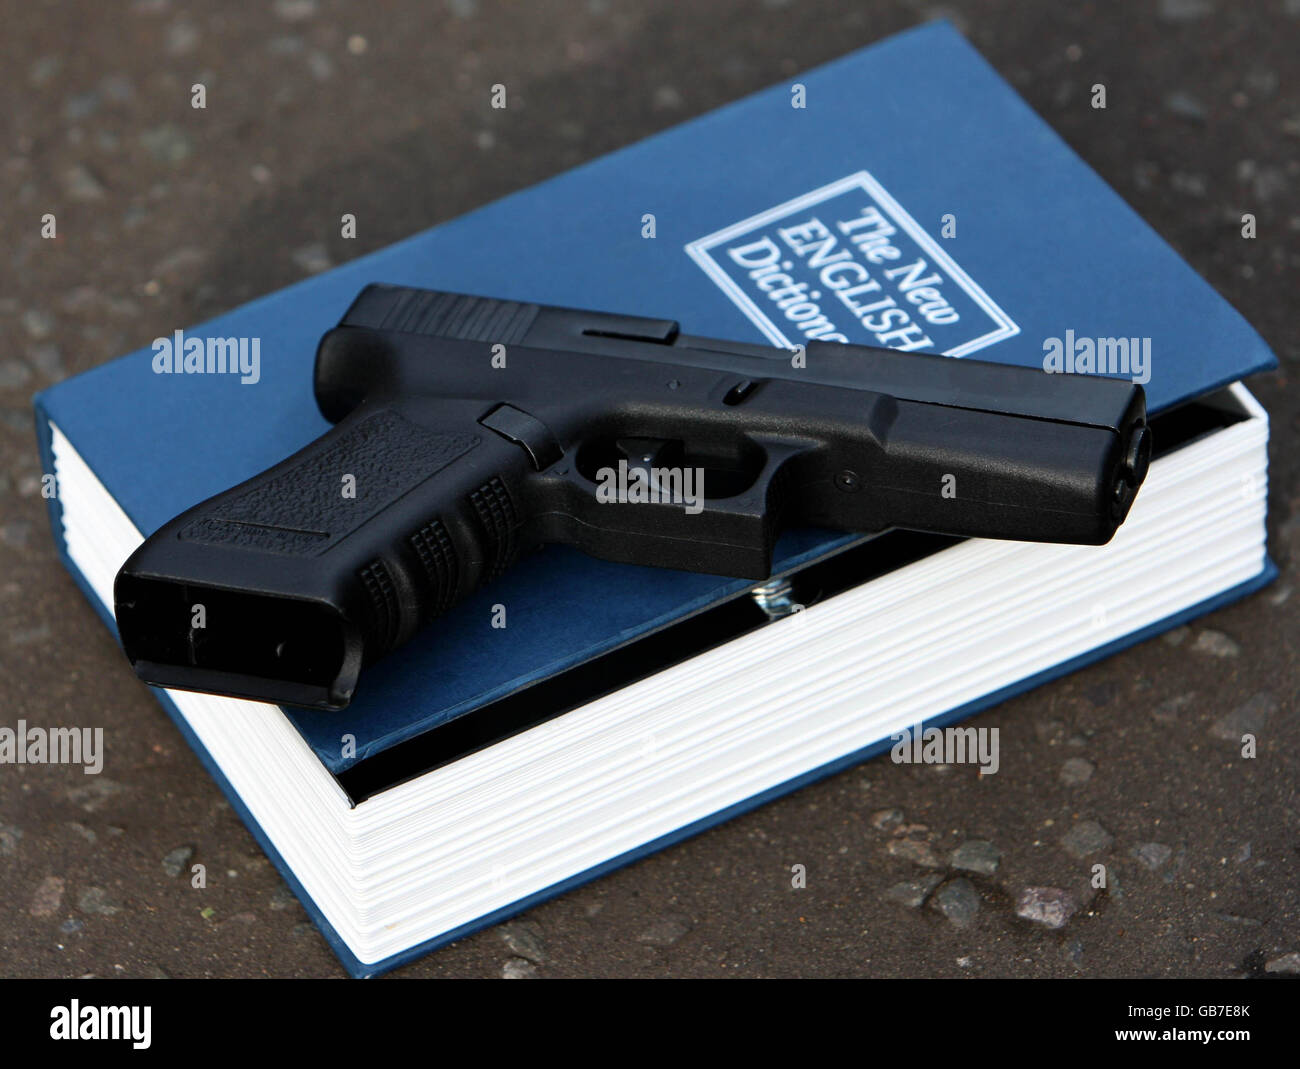 Fake Pistol High Resolution Stock Photography and Images - Alamy